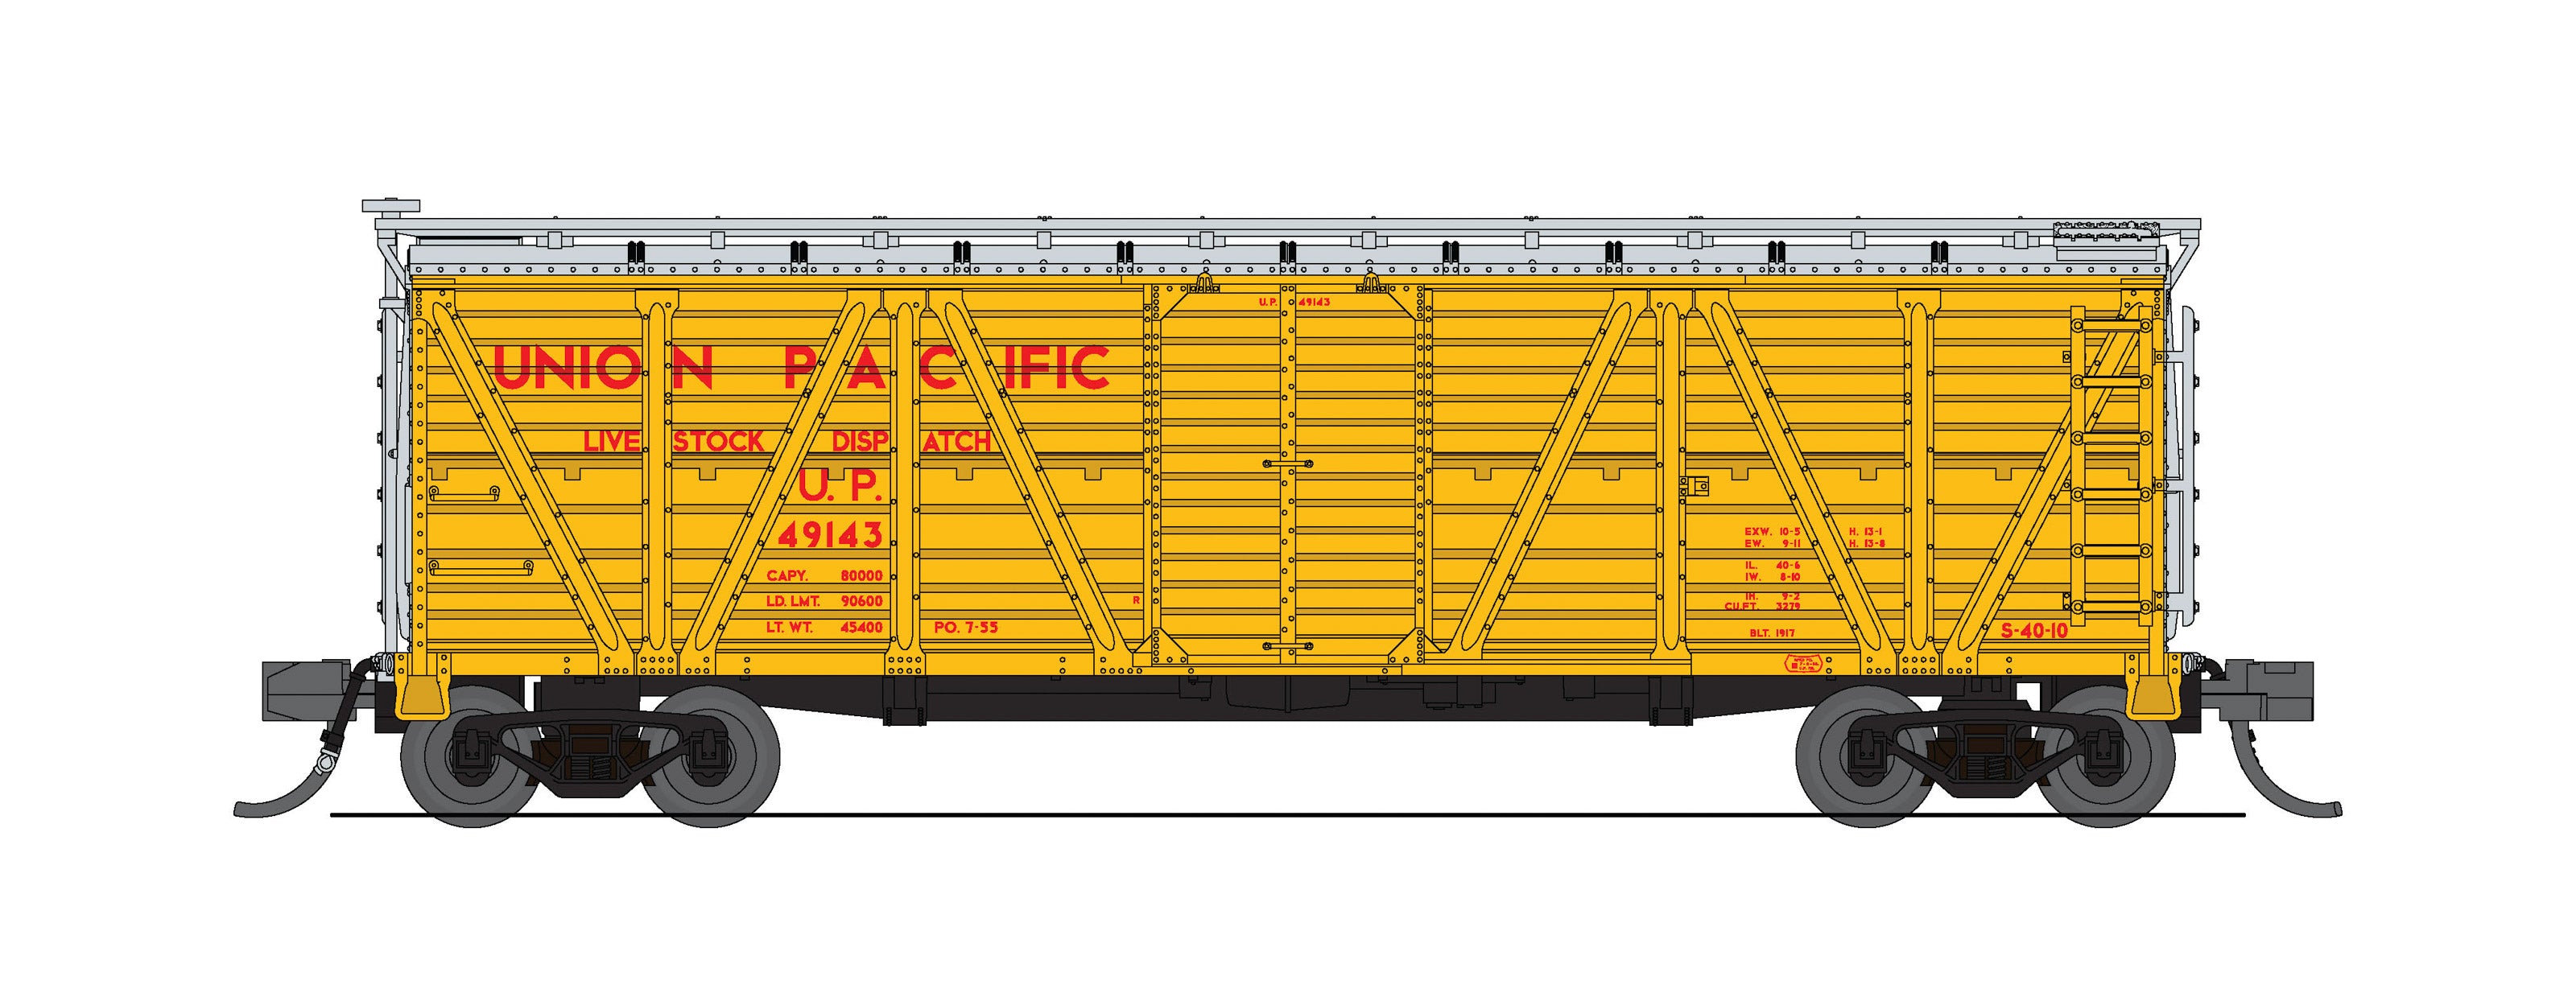 8463 40' Wood Stock Car, UP 49340, Mule Sounds, N Scale